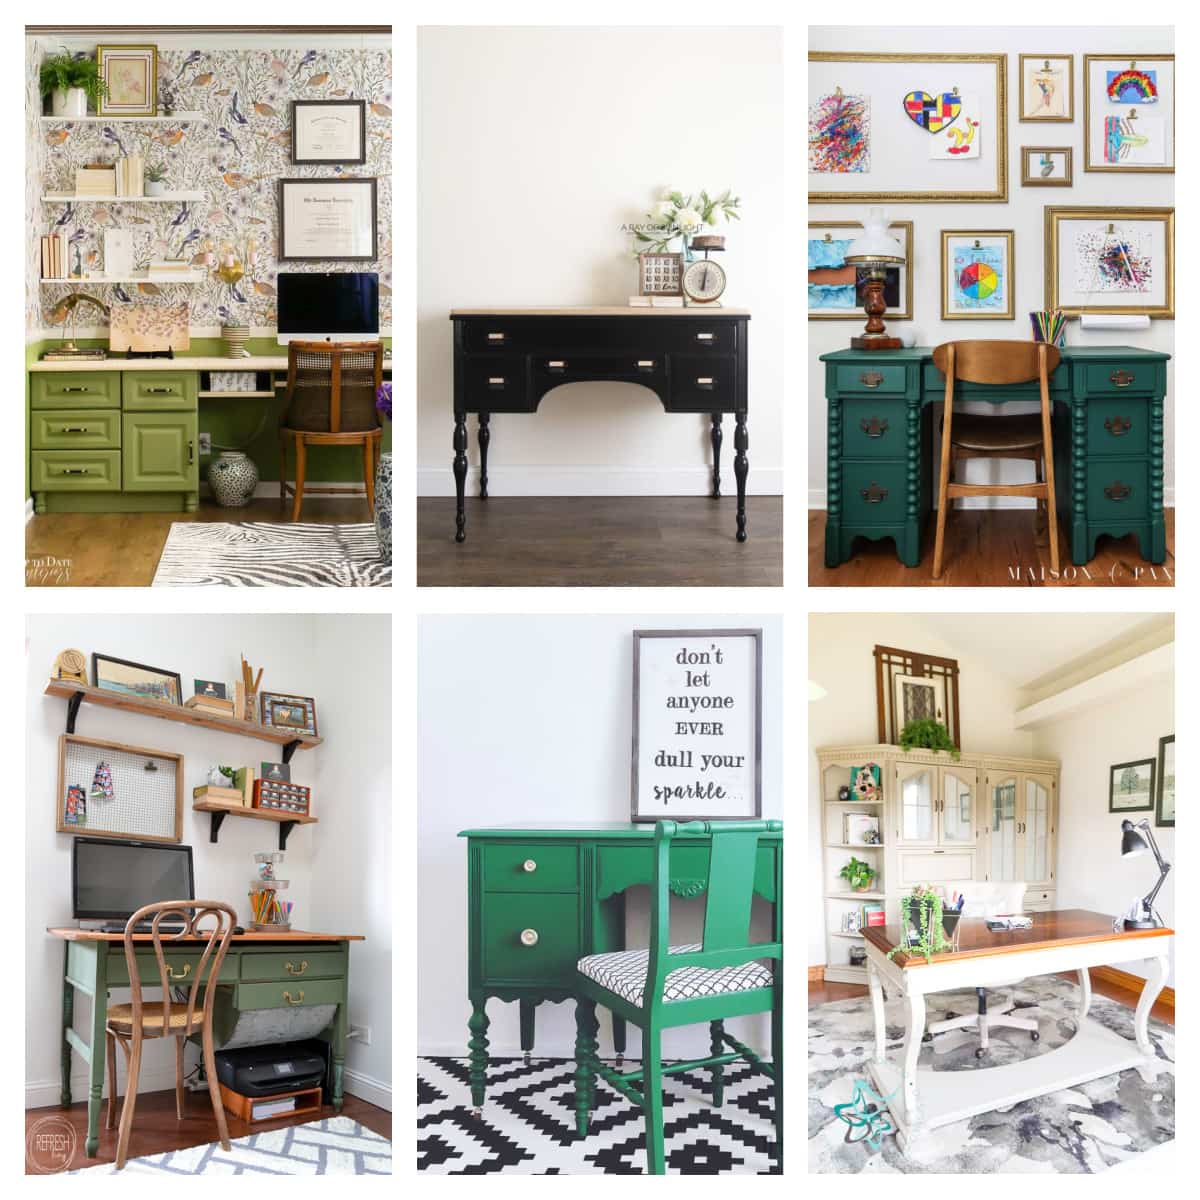 14 Black Painted Furniture Makeovers (classic elegance) - Artsy Chicks Rule®